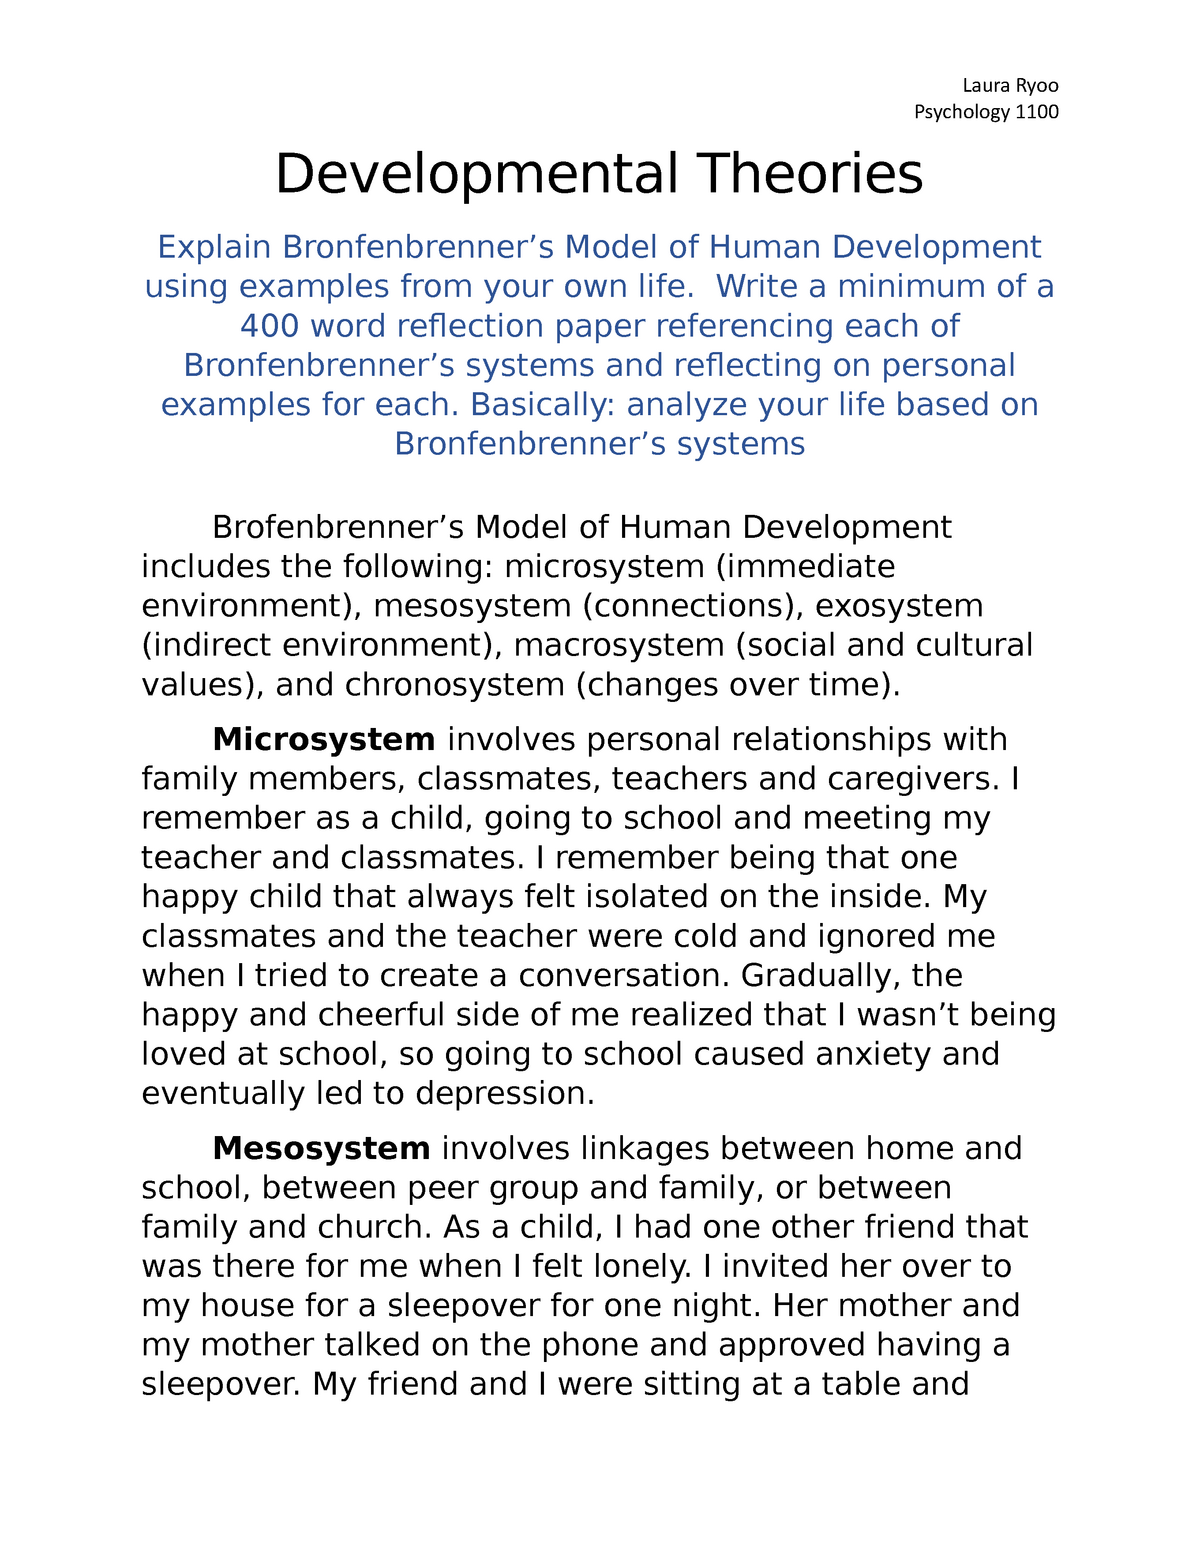 research paper about developmental theory